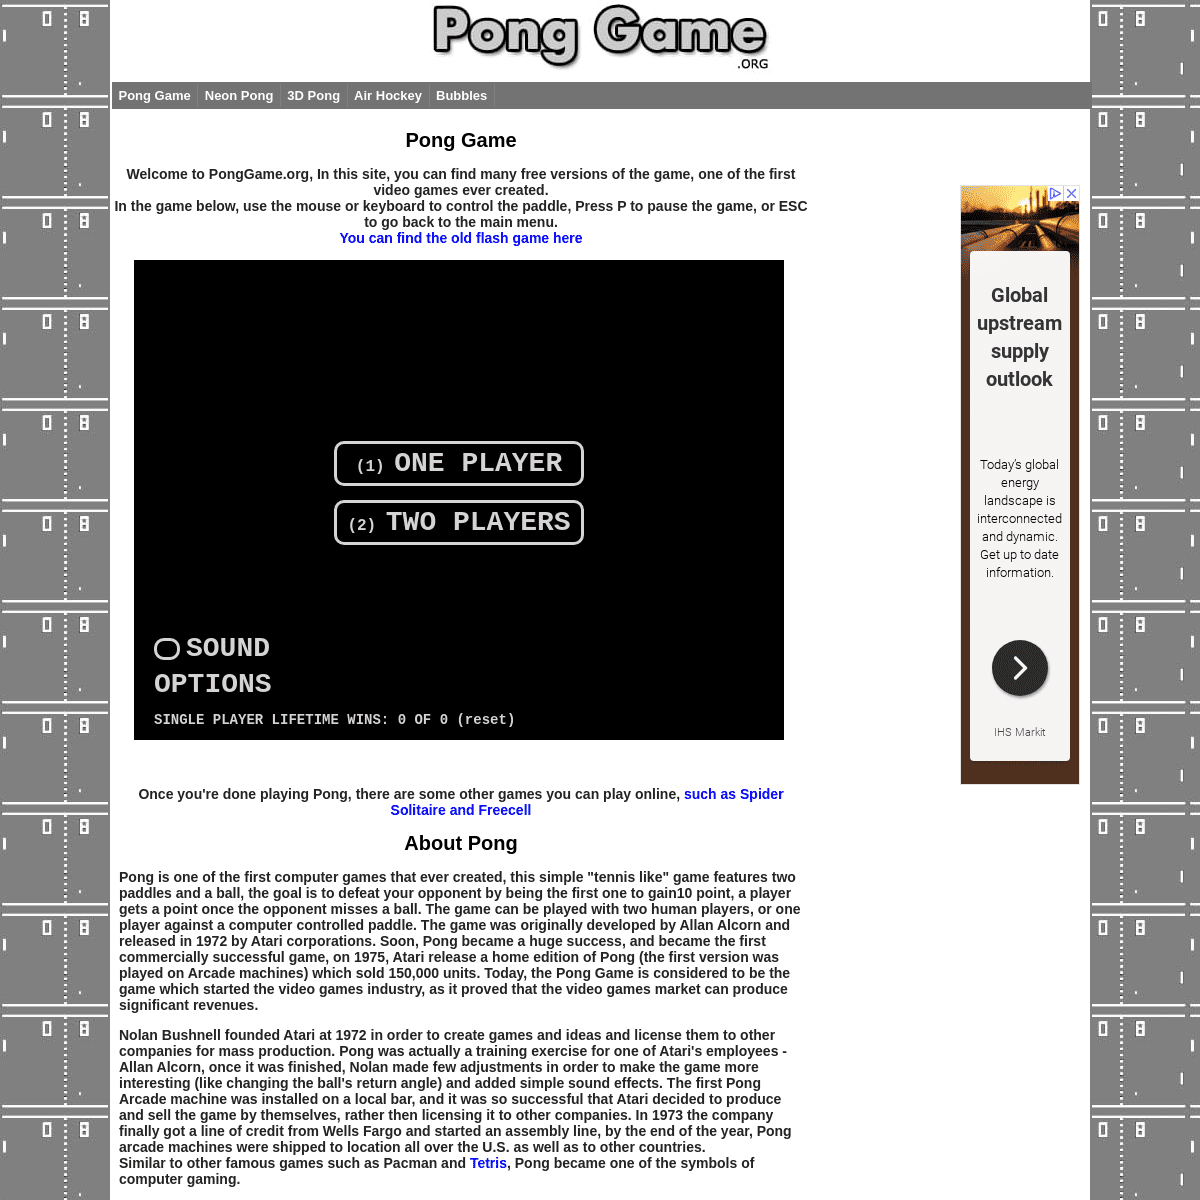 A complete backup of https://ponggame.org